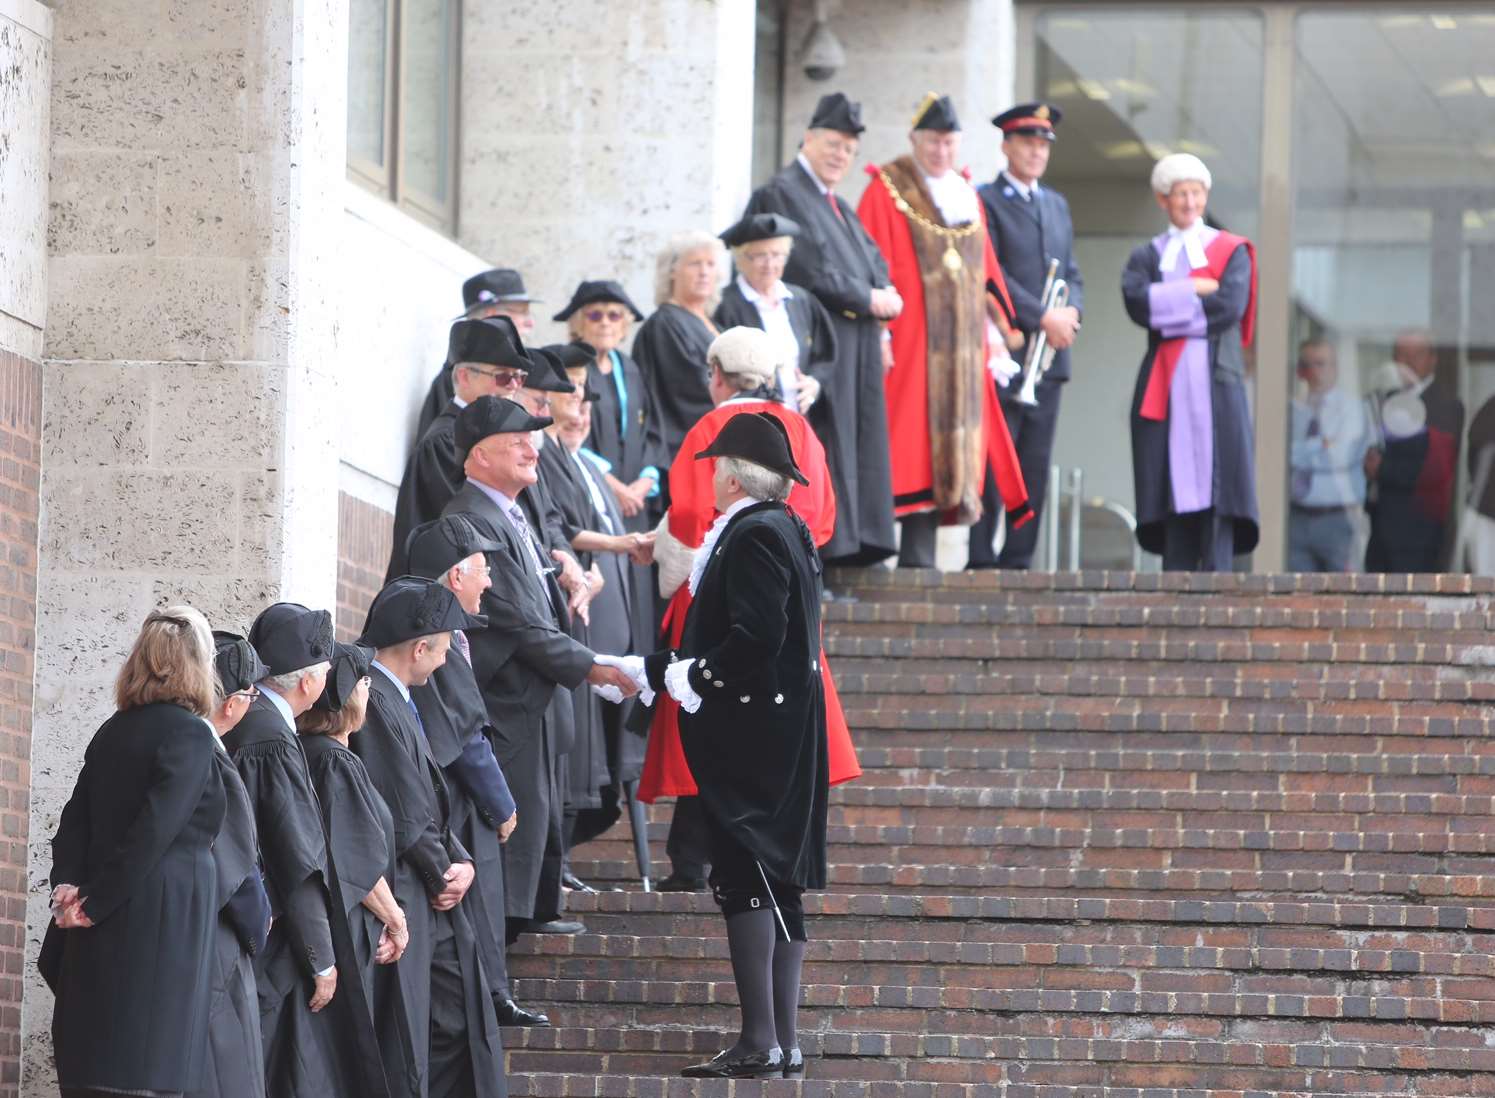 Officials, including Maidstone's mayor cllr Malcolm Greer greet the new judge on the steps to Maidstone's Crown Court